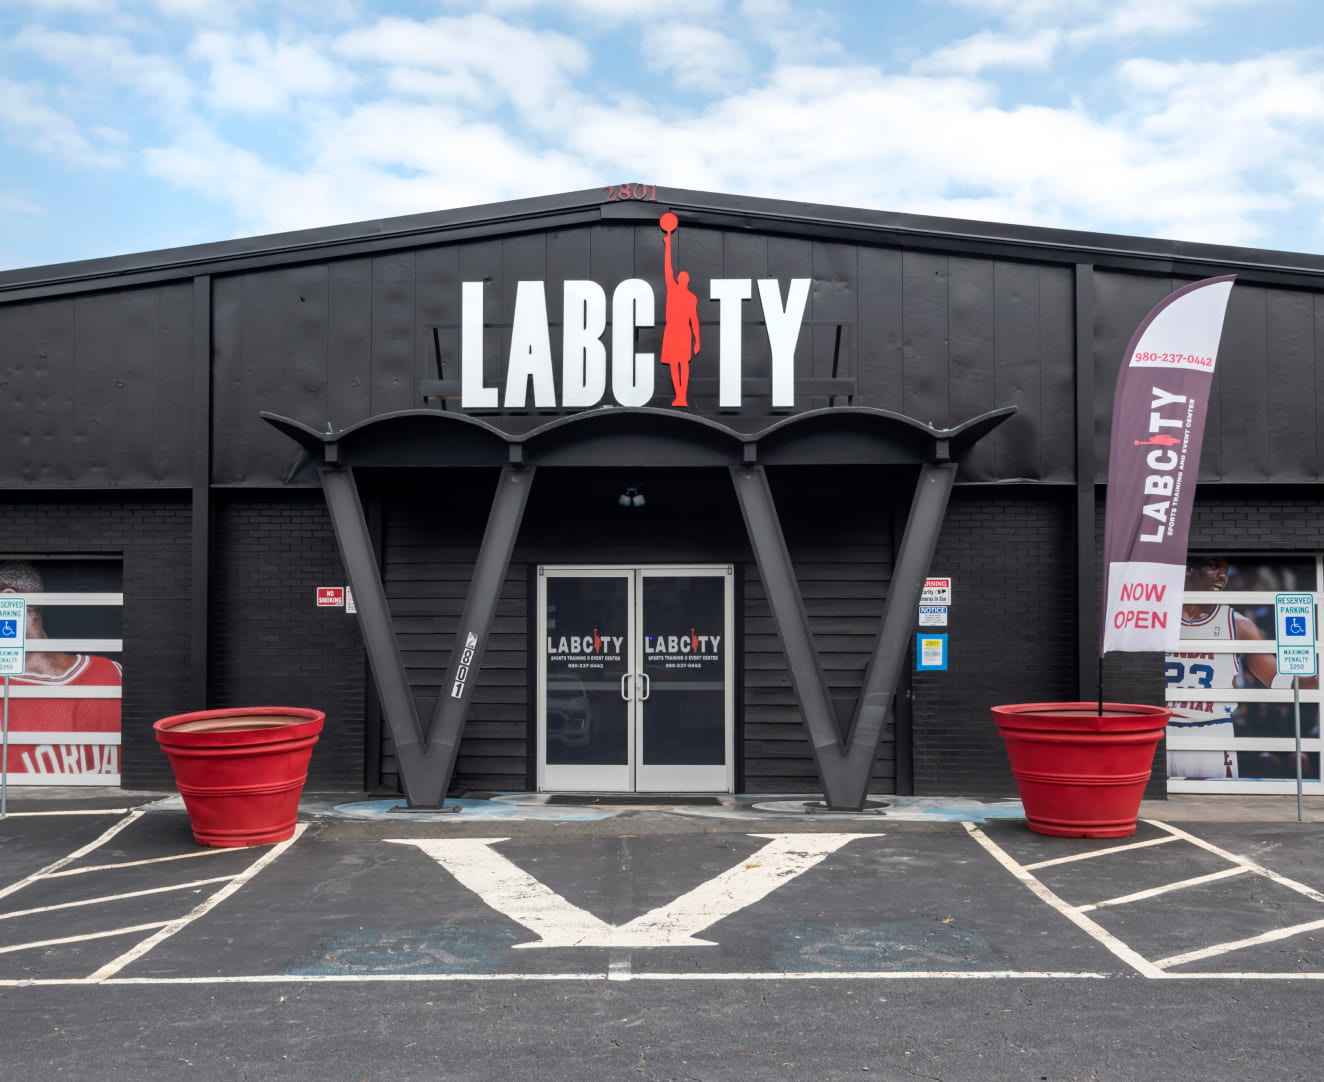 The entrance to LabCity at 2801 E. Independence Blvd in Charlotte, NC.